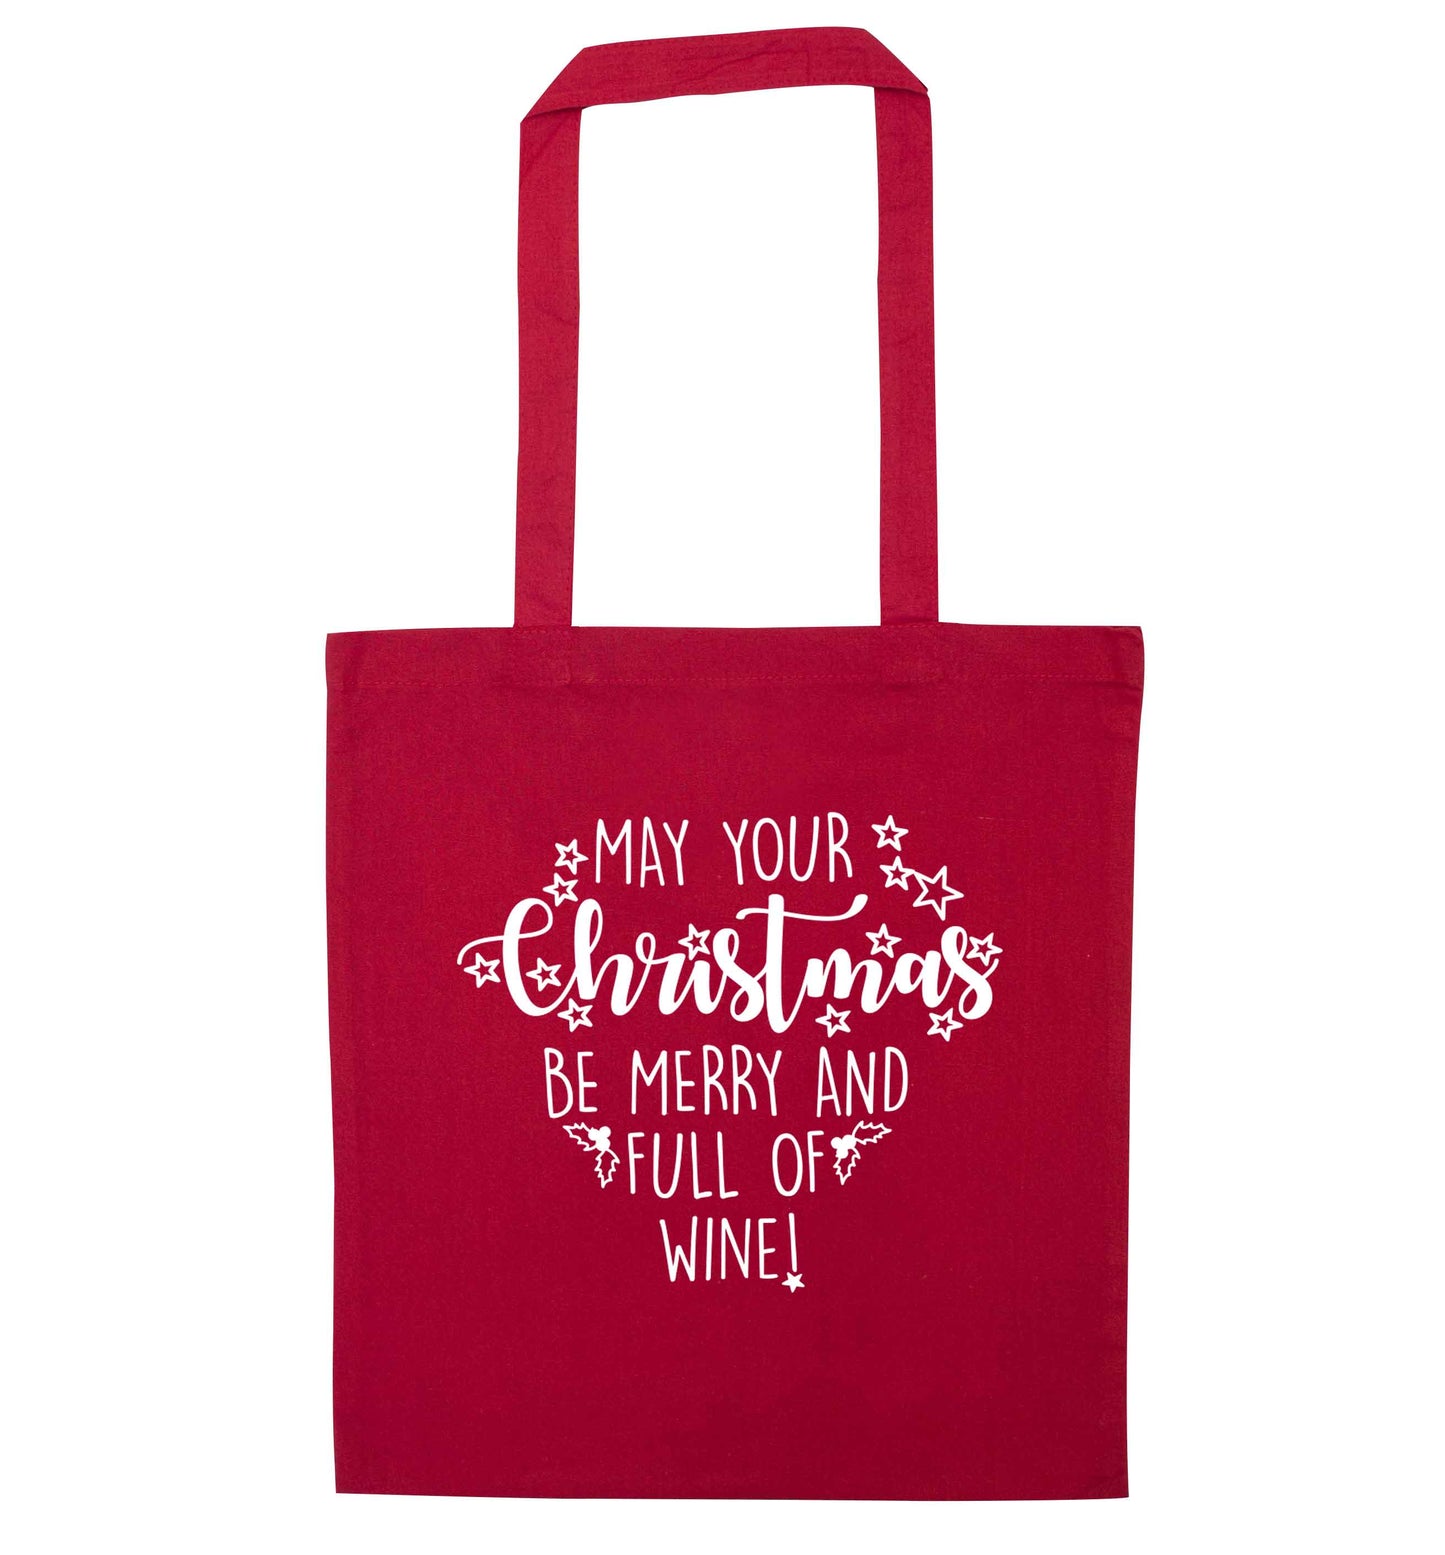 May your Christmas be merry and full of wine red tote bag